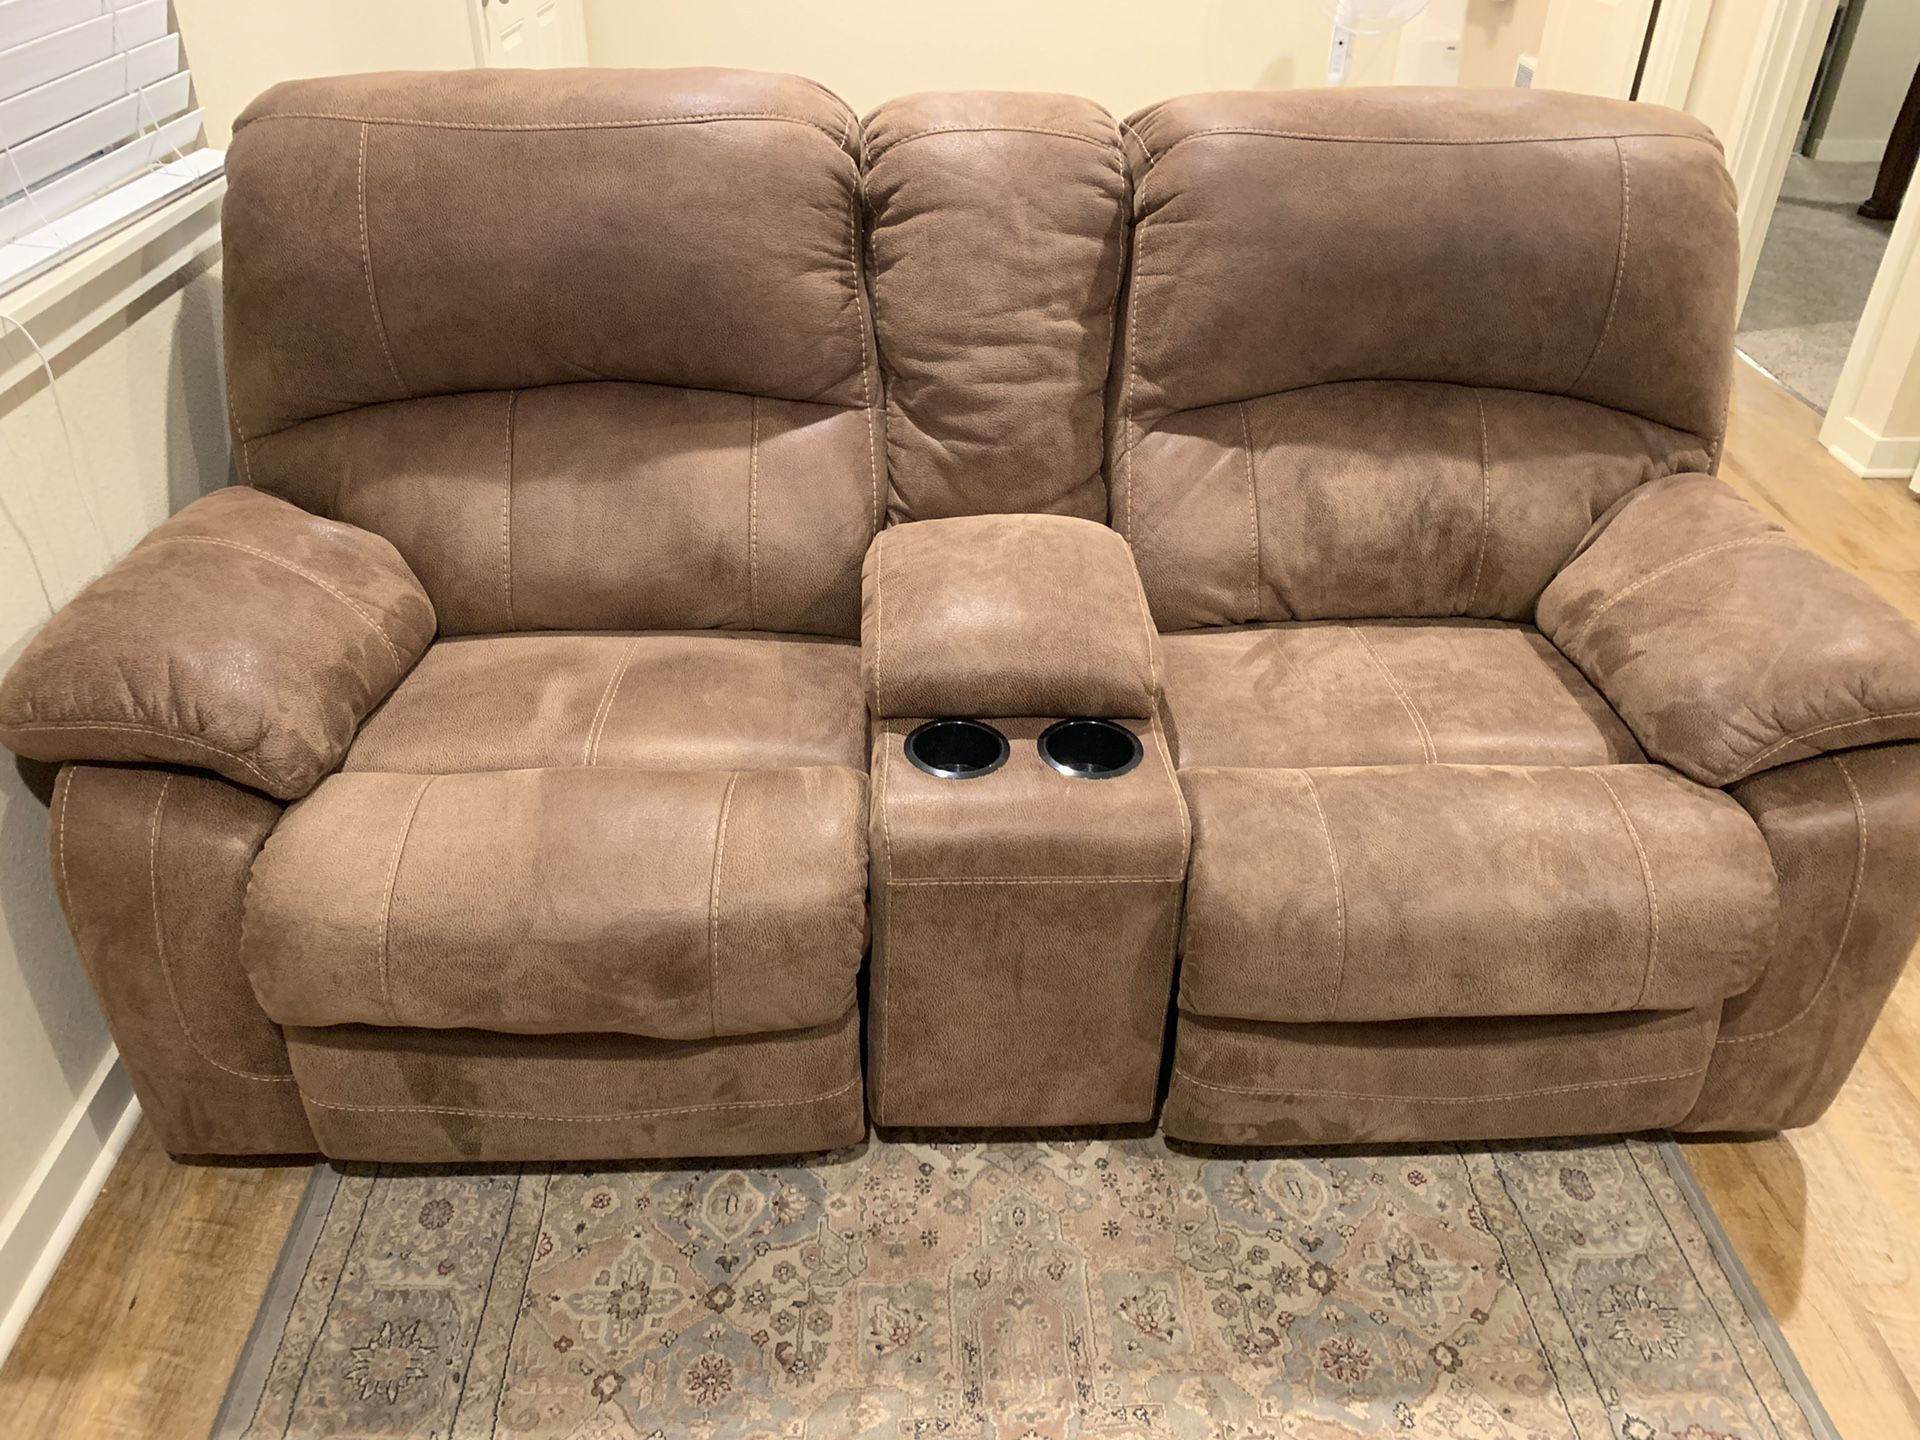 Couch love seat